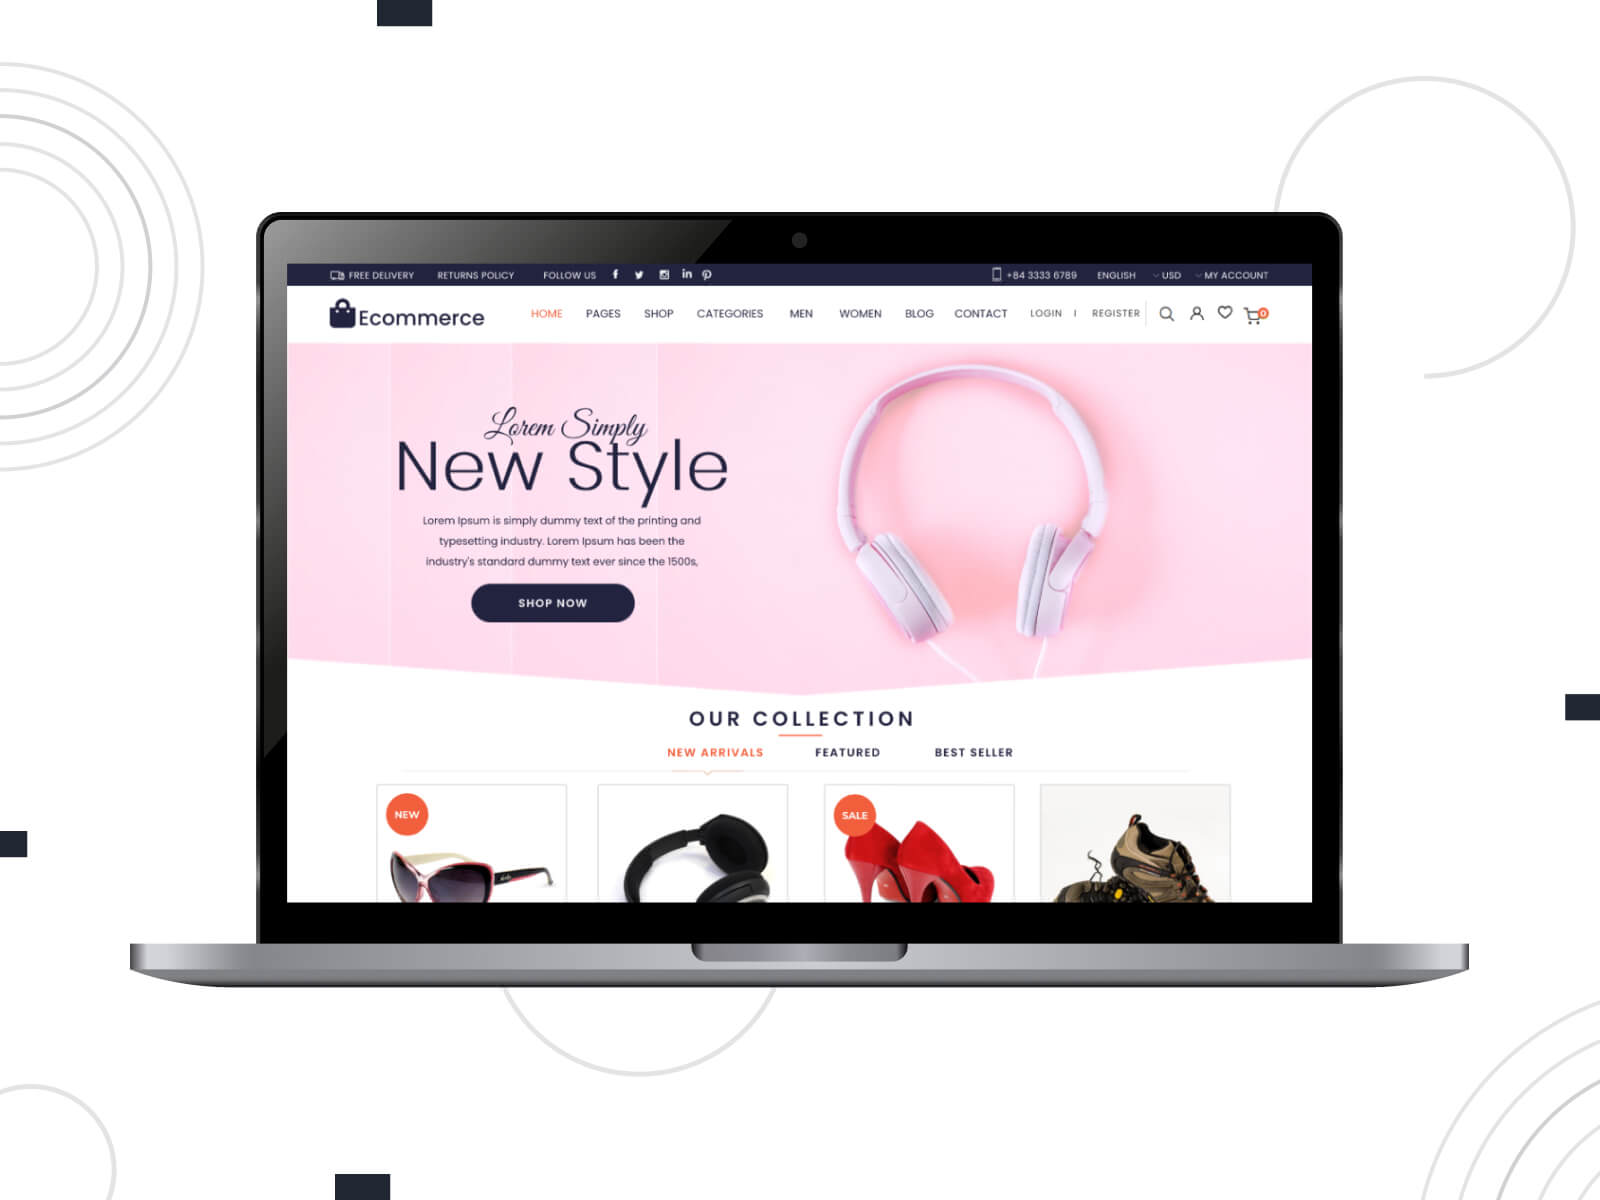 Image of Ecommerce Mega Store - bright, calm, eCommerce optimized theme for WordPress grocery blogs in misty rose, fire brick, and peru color array